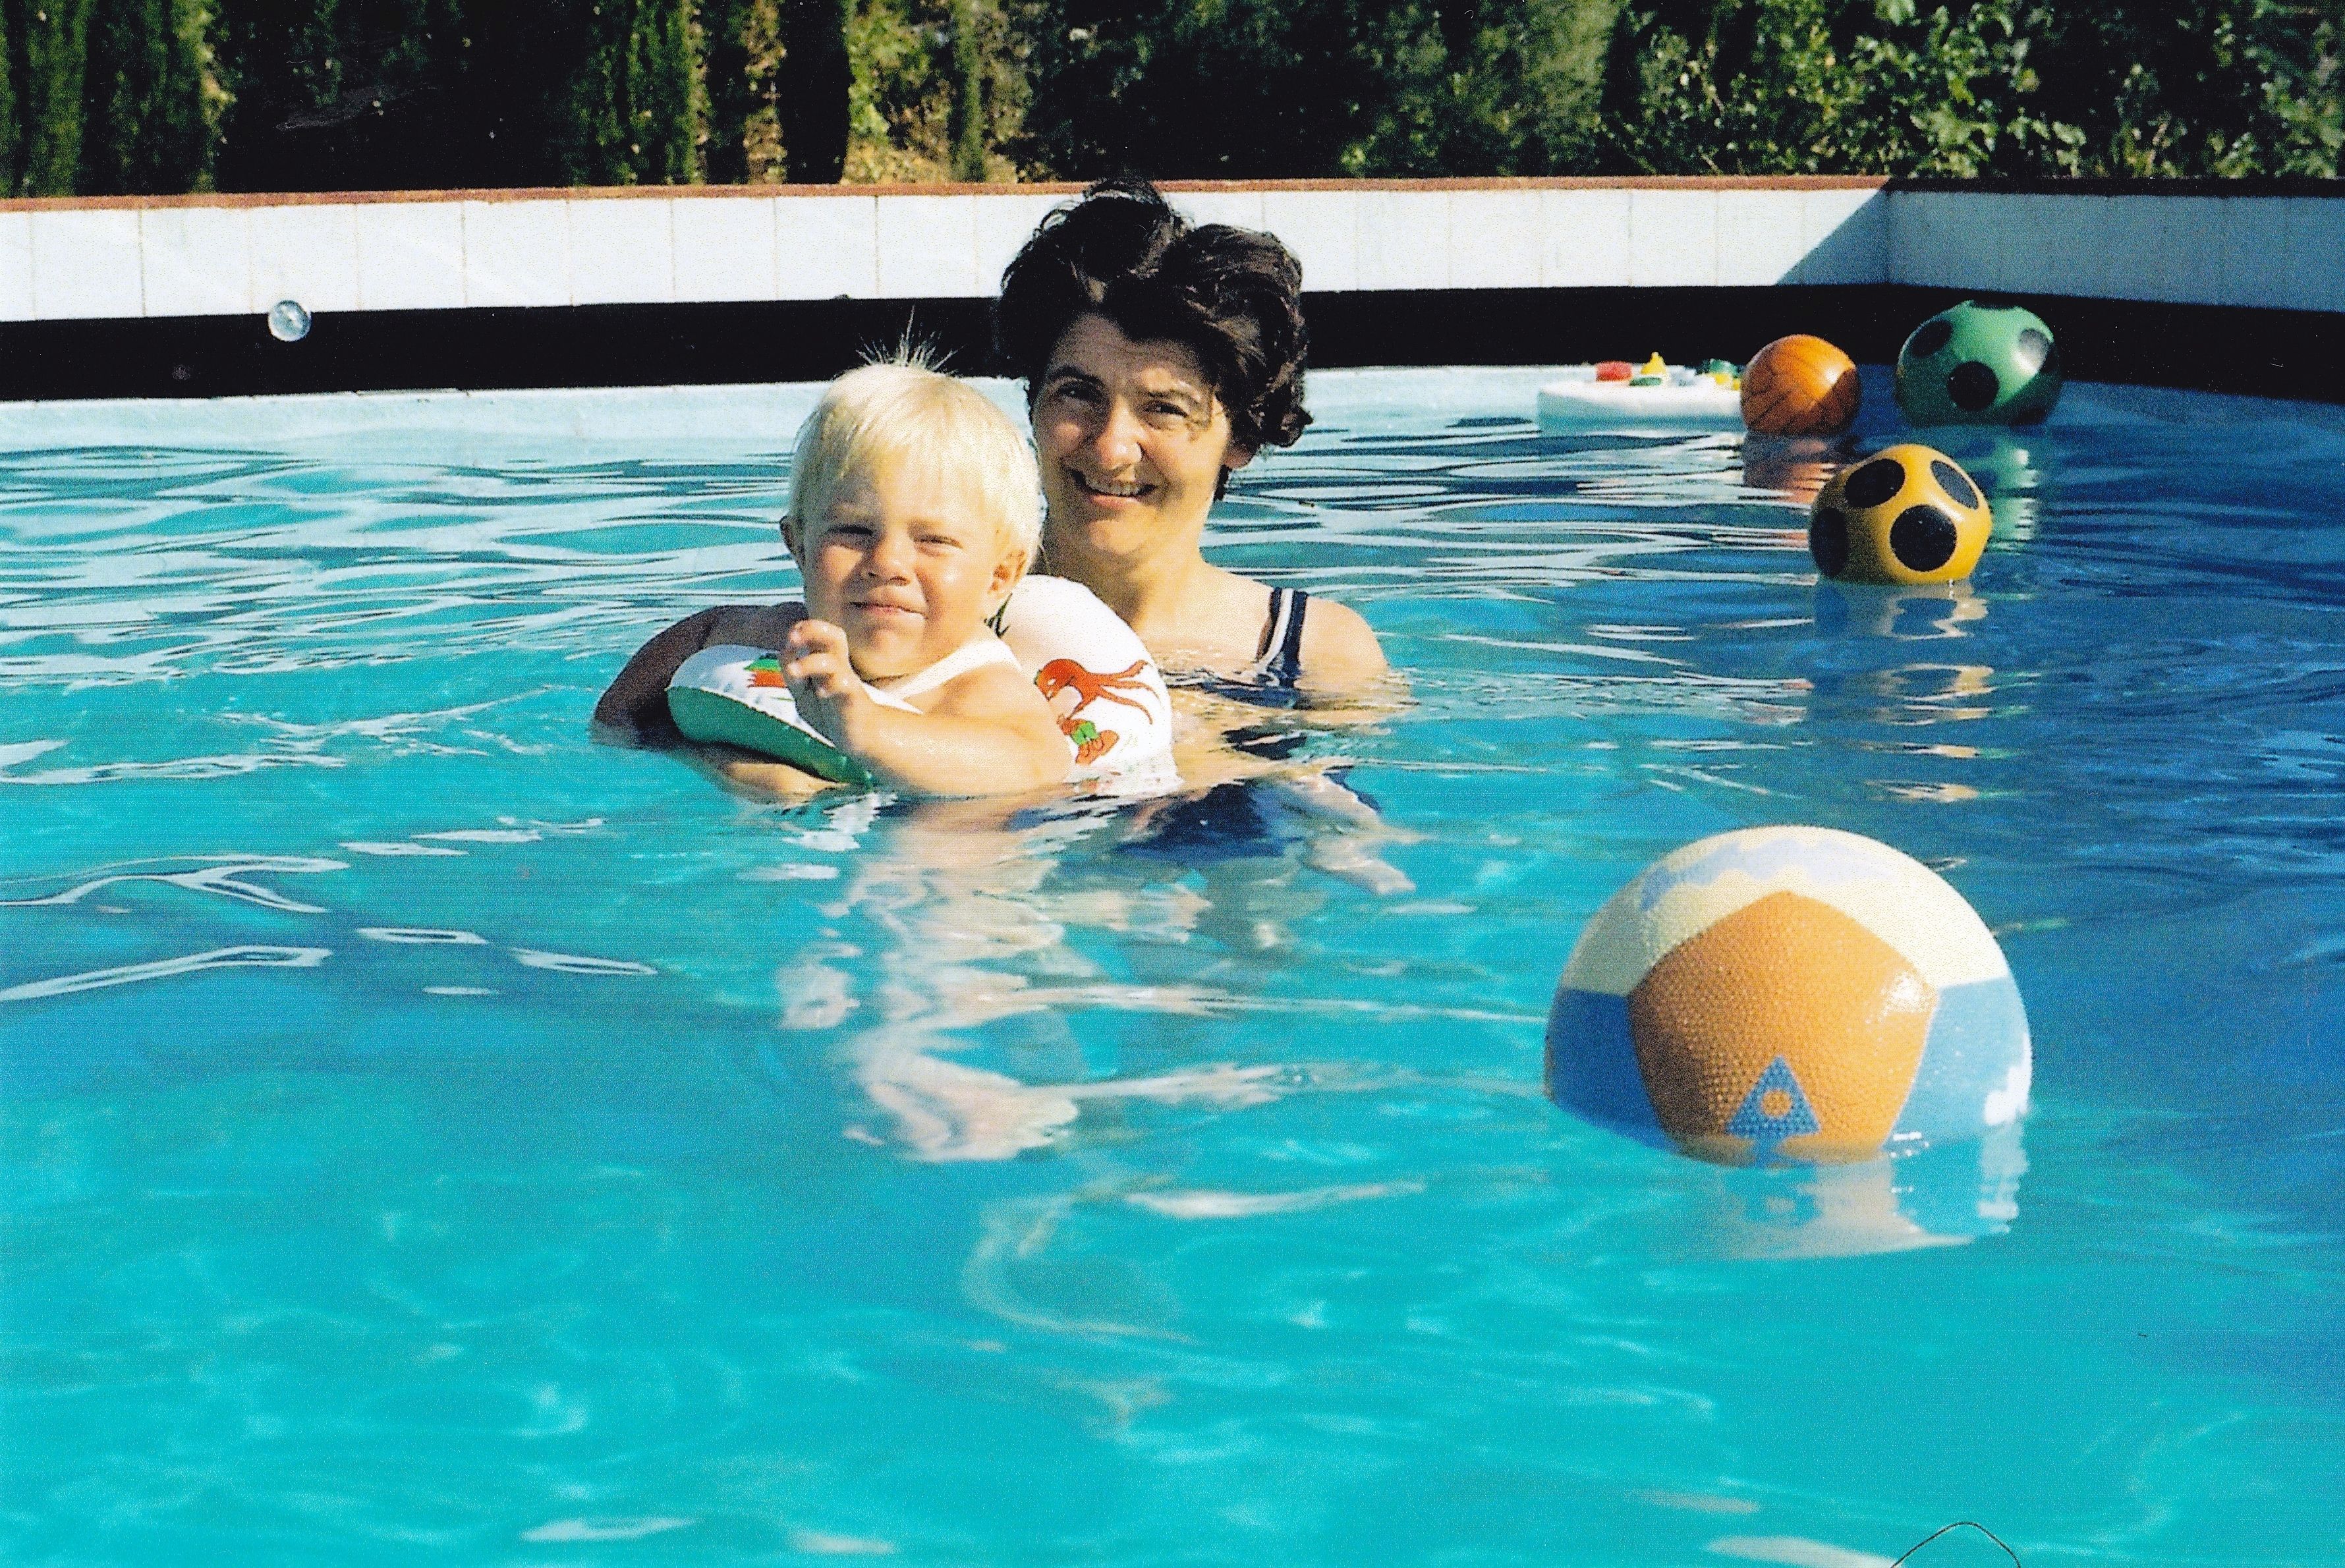 Mum and little me in the swimming pool, with bright colours